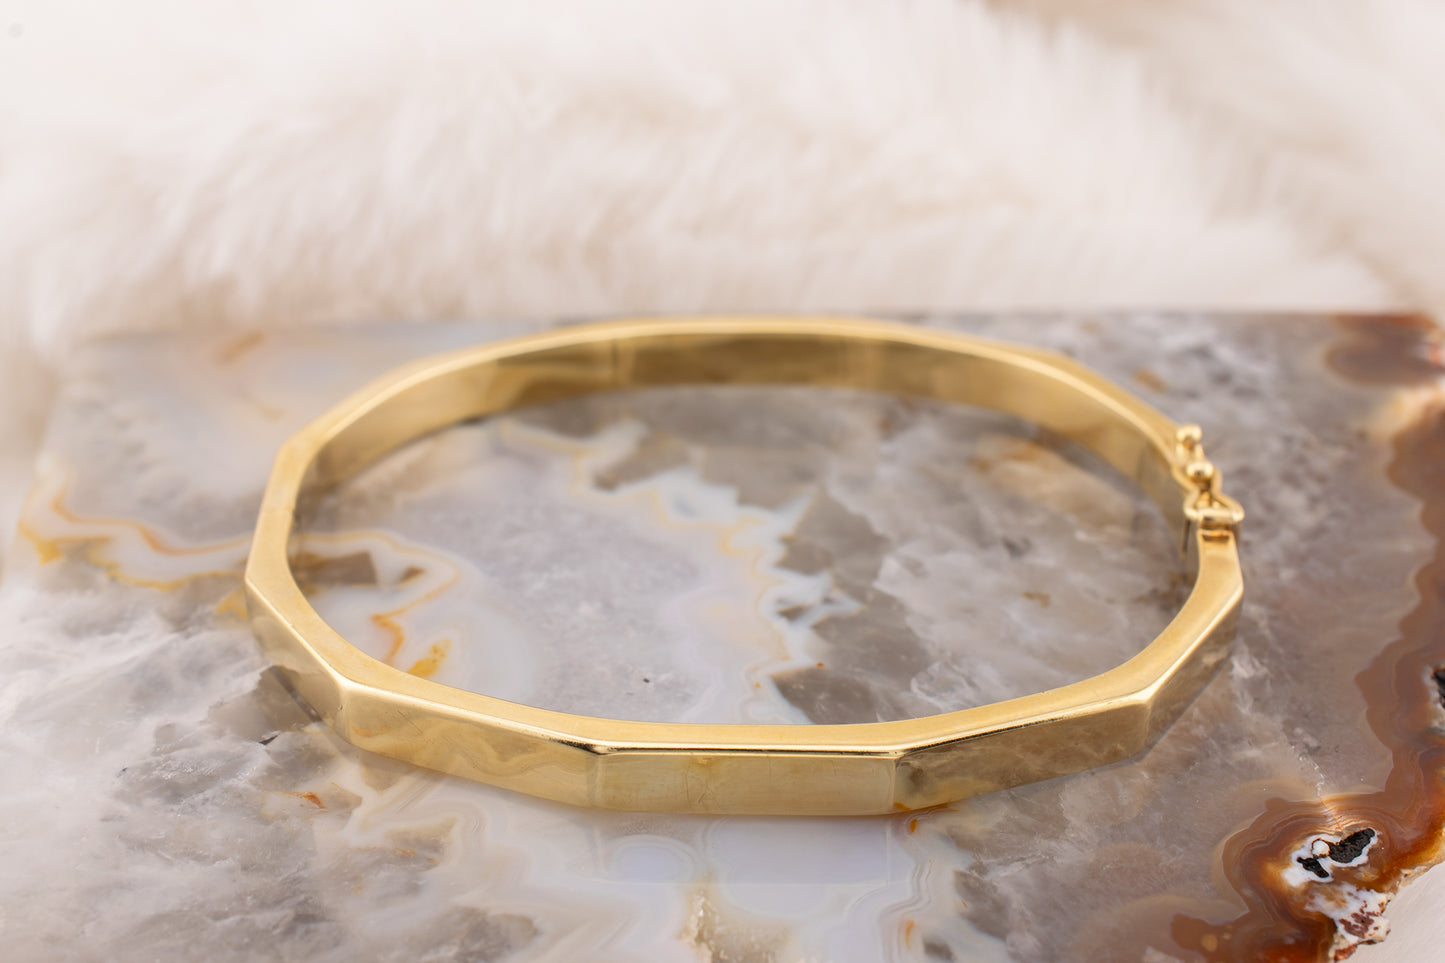 Vintage 14KT Yellow Gold High Polish Hexagonal Hinged Bangle Bracelet Approx. 7 3/4 Inches